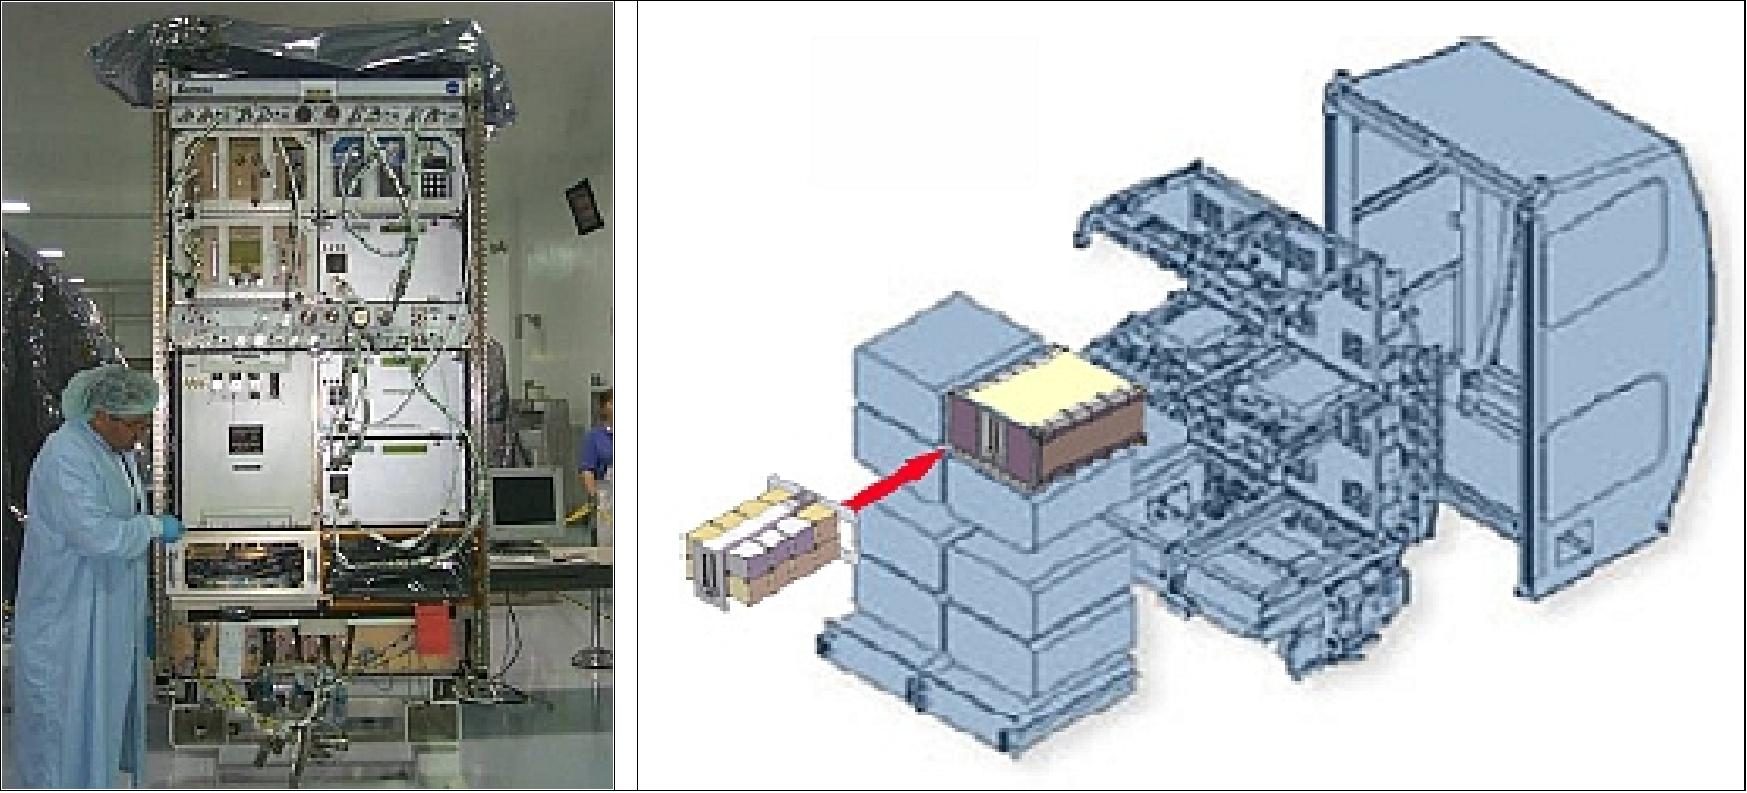 Figure 39: EXPRESS Rack under test at NASA (left) and NanoRacks platform installation (right) in EXPRESS Rack and ISS module structure (image credit: Kentucky Space, NanoRacks LLC)